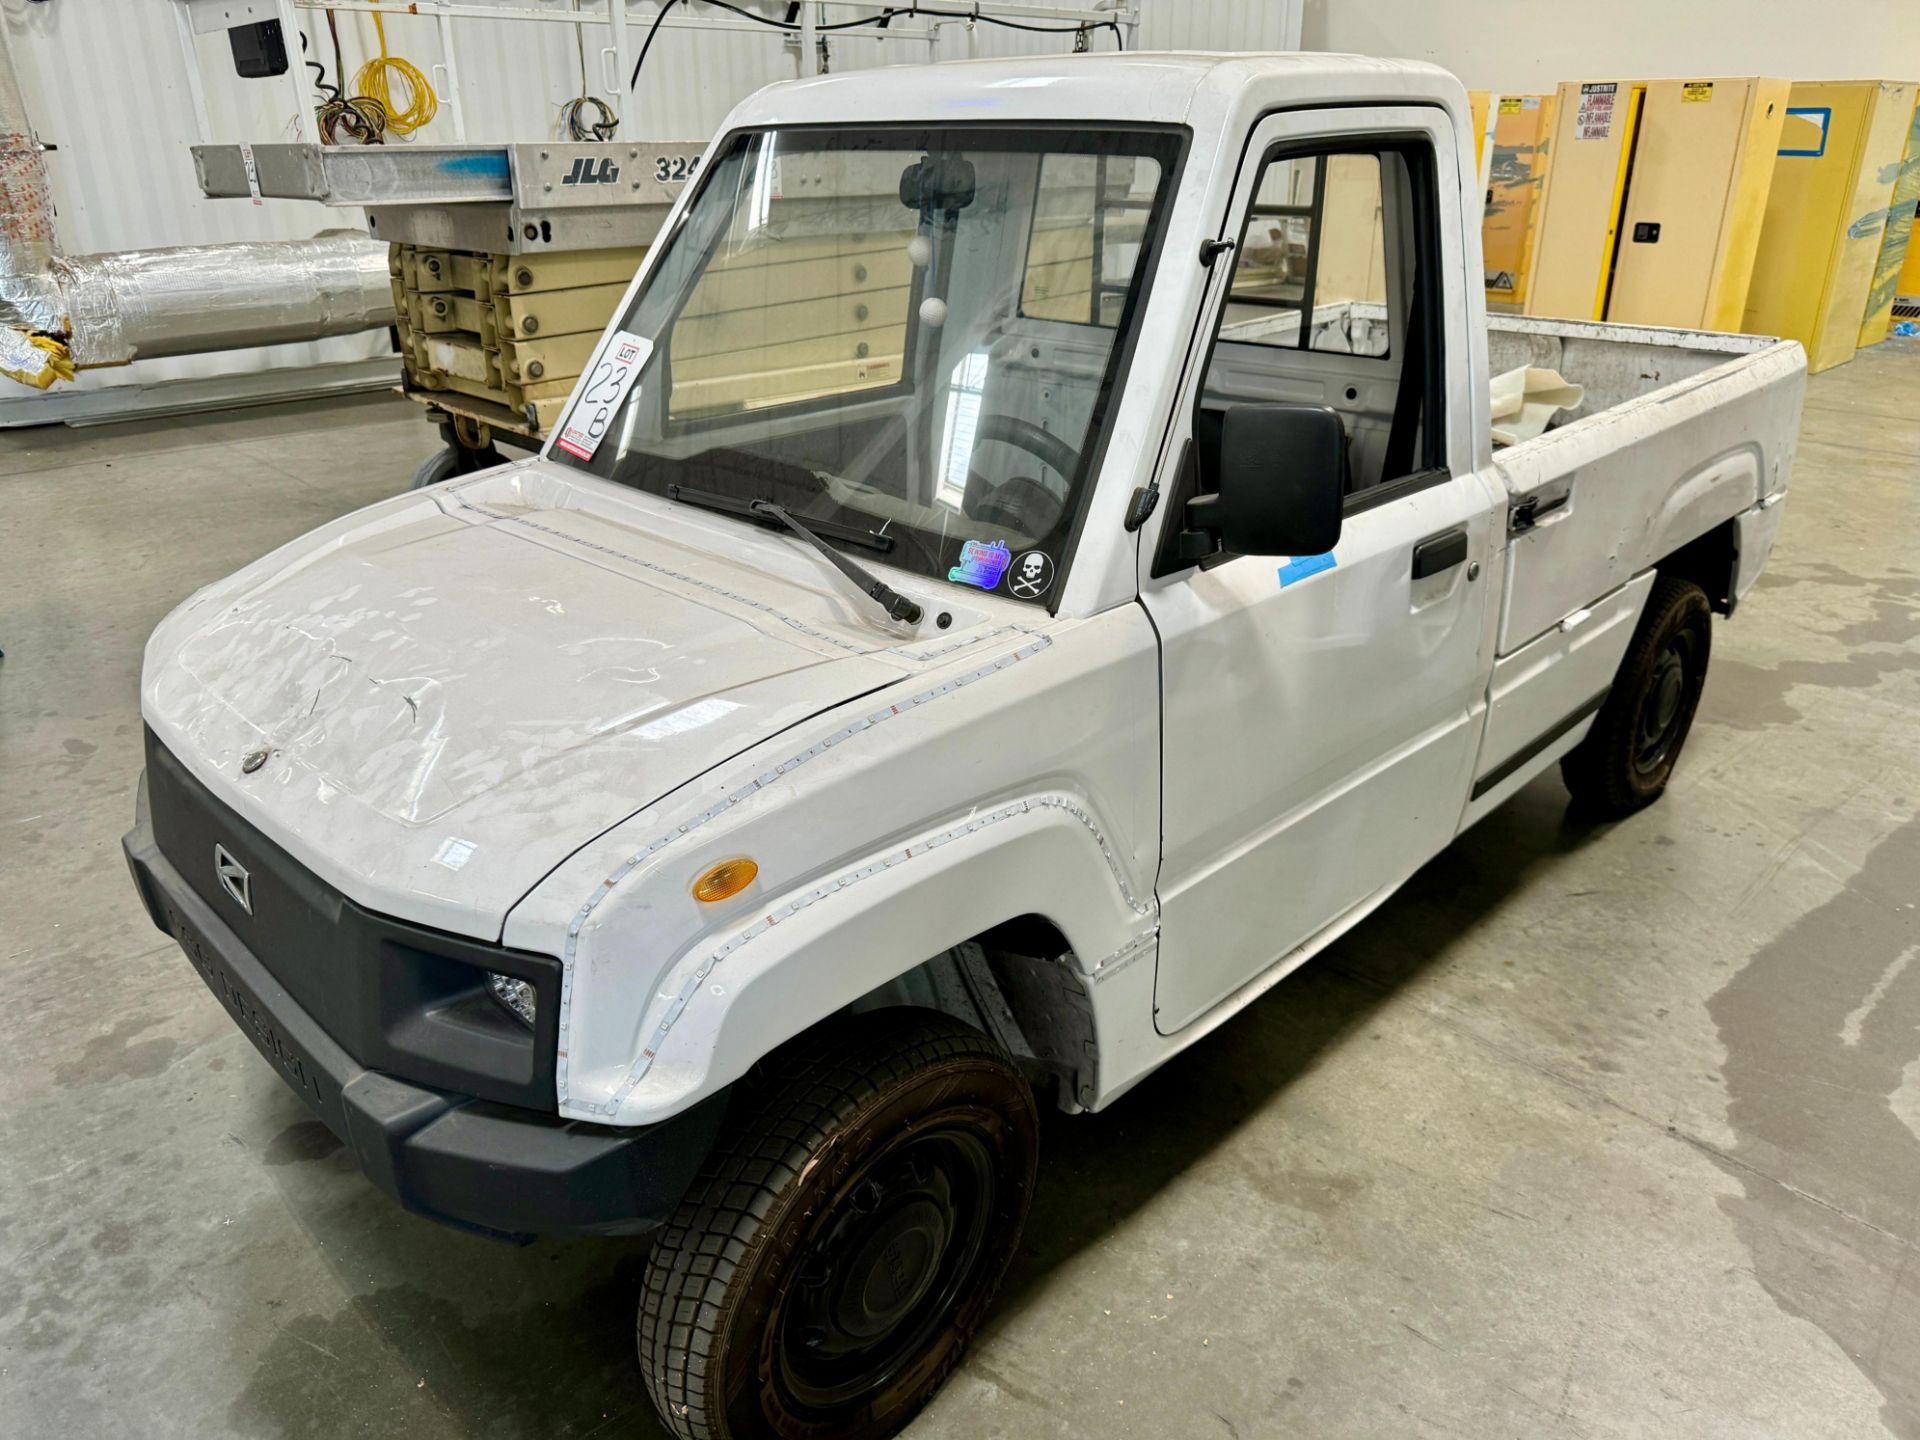 CSG DESIGN ELECTRIC UTILITY VEHICLE, OUT OF SERVICE/MAY NEED BATTERIES - Image 8 of 10